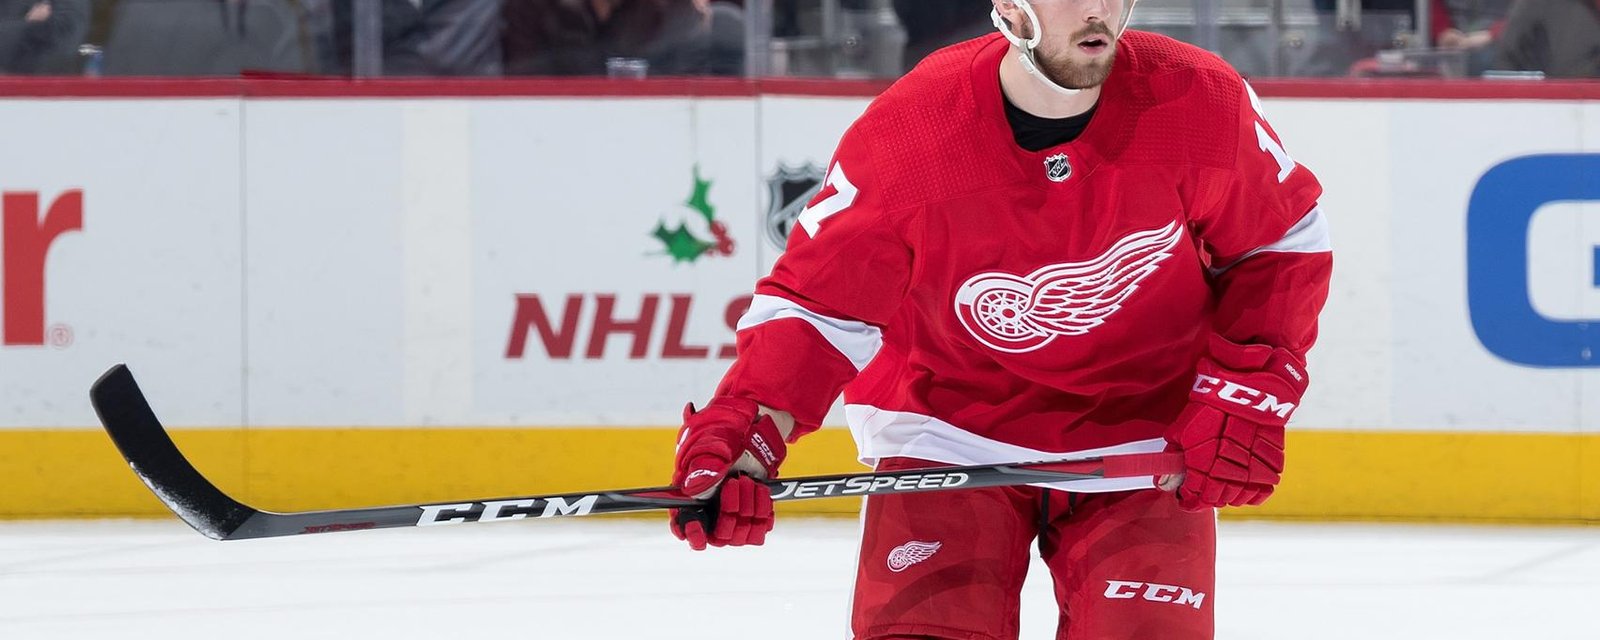  Tough blow for rookie Wings as Blashill shuffles his cards ahead of game against Kings.